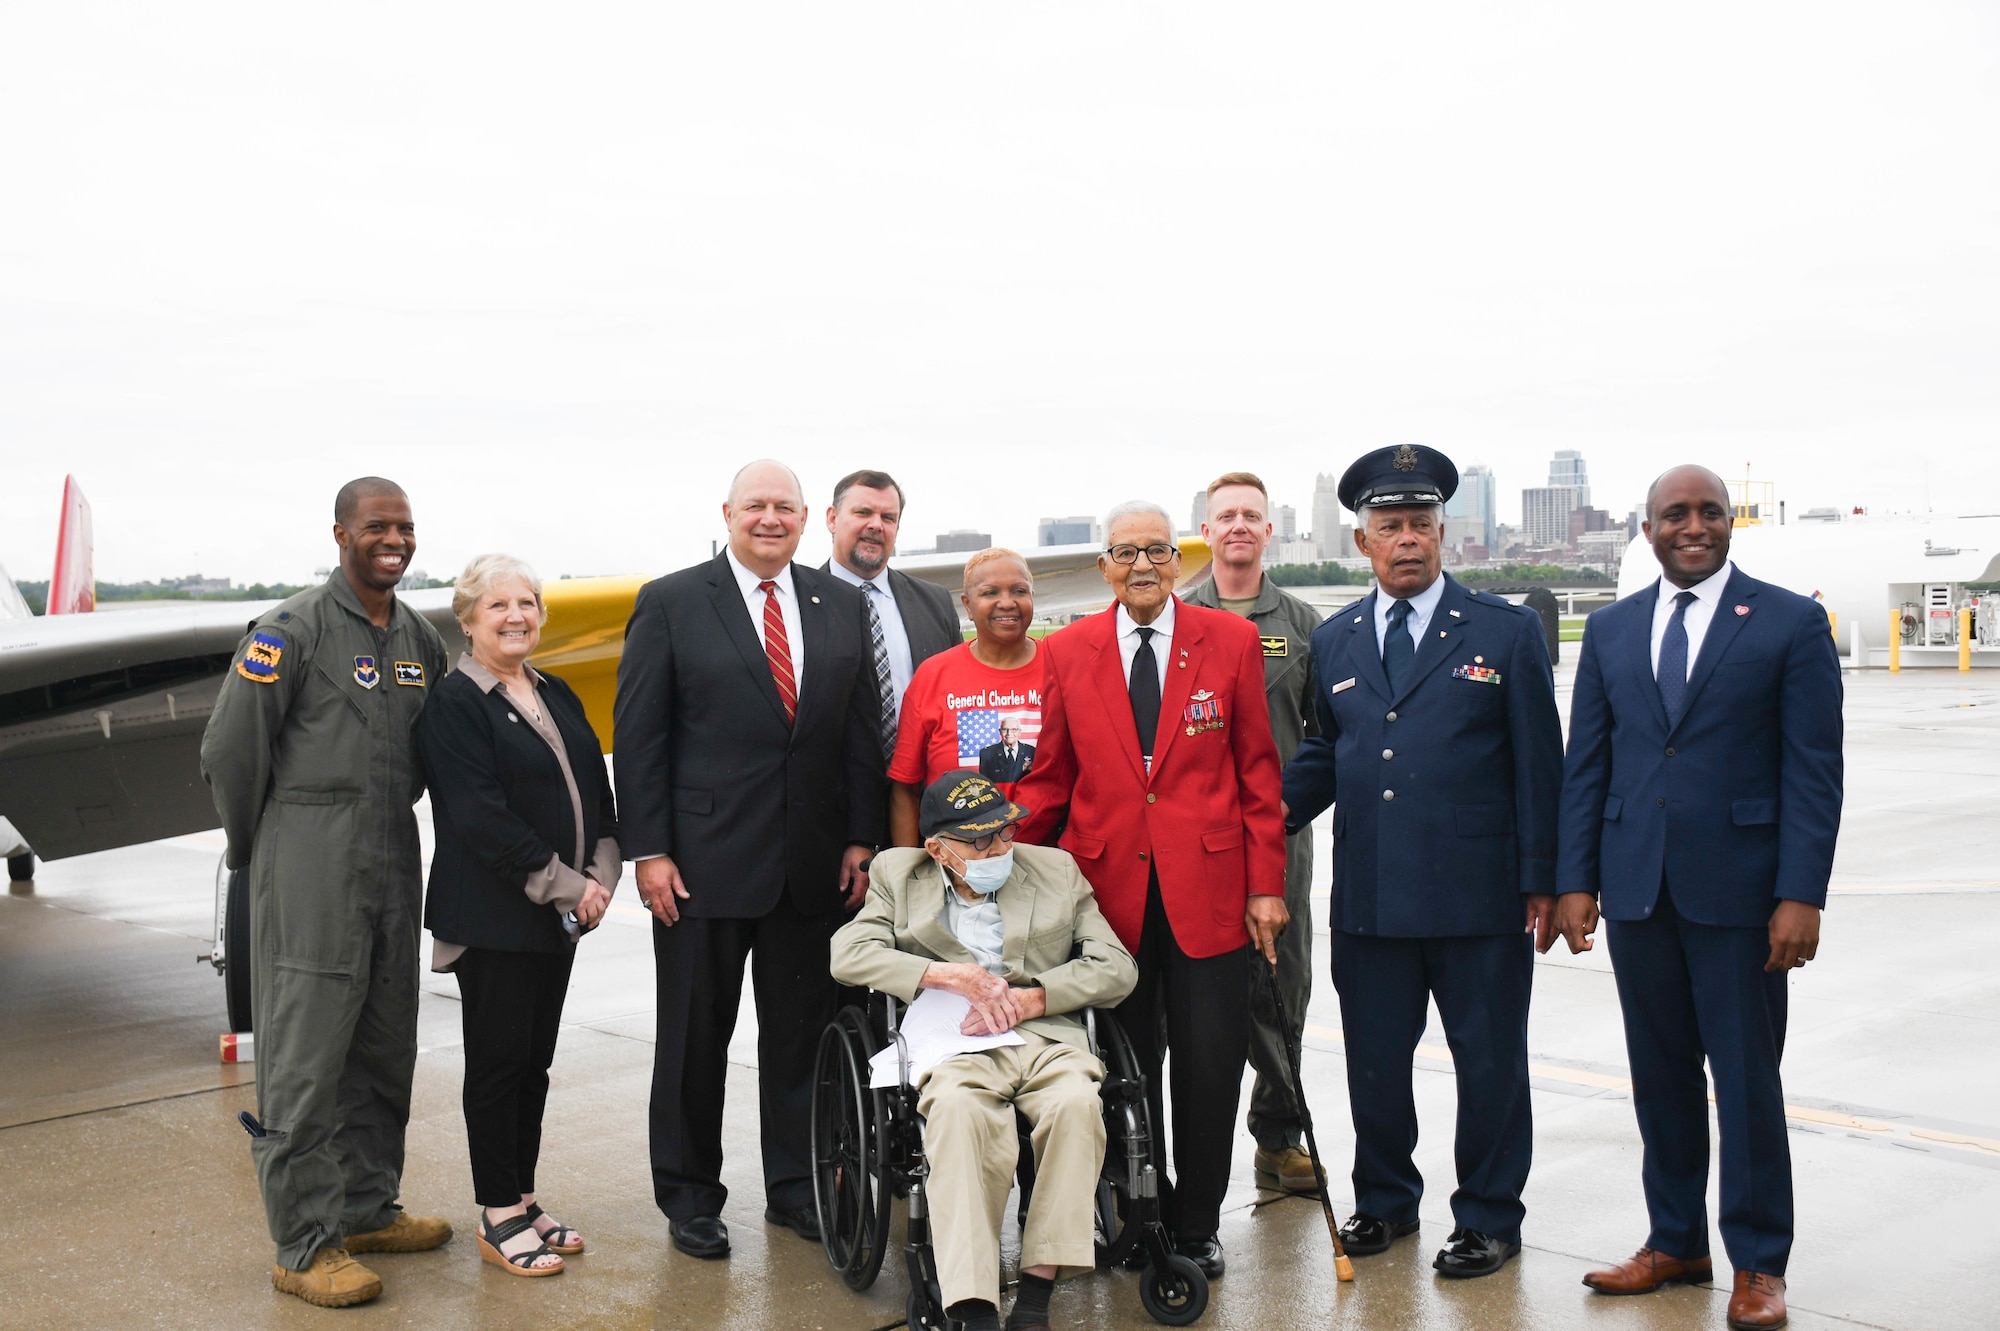 Speakers from the rededication ceremony pose for a photo near a Red-Tail P-51 Mustang painted to honor the Tuskegee Airmen